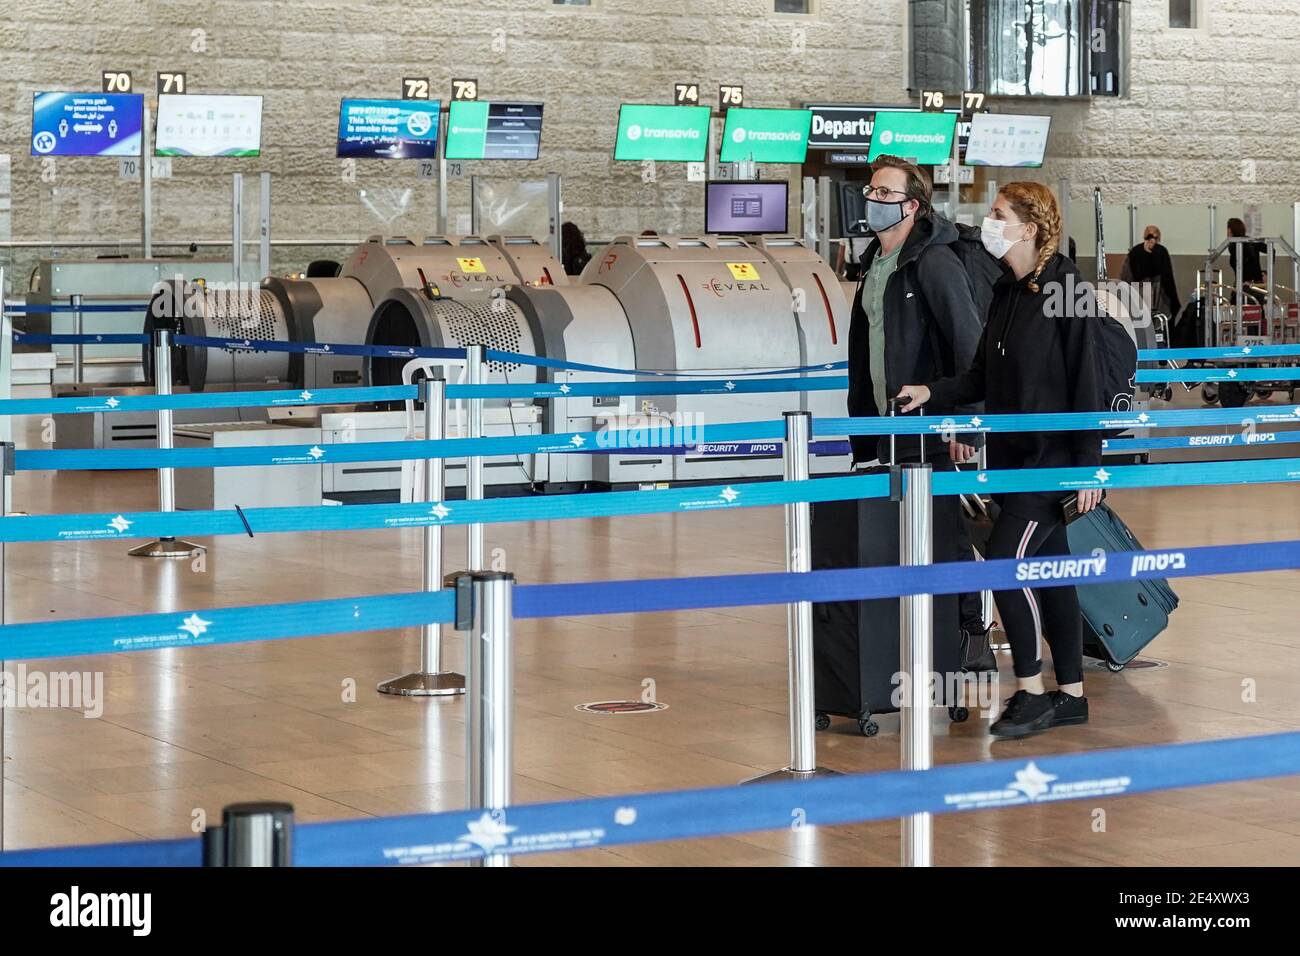 Lod, Israel. 25th January, 2021. Last minute outgoing travelers check in for flights at Tel Aviv's Ben Gurion International Airport just hours ahead of a near total air travel ban taking effect at midnight 25th January, 2021, proposed and approved by the government cabinet less than 24 hours ago. Exceptions will include only circumstances such as medical treatment, judicial proceedings or funerals of close family relatives but even in such cases no commercial flights will be available. Emergency Coronavirus regulations will be in effect at least until 31st January, 2021. Credit: Nir Alon/Alamy Stock Photo